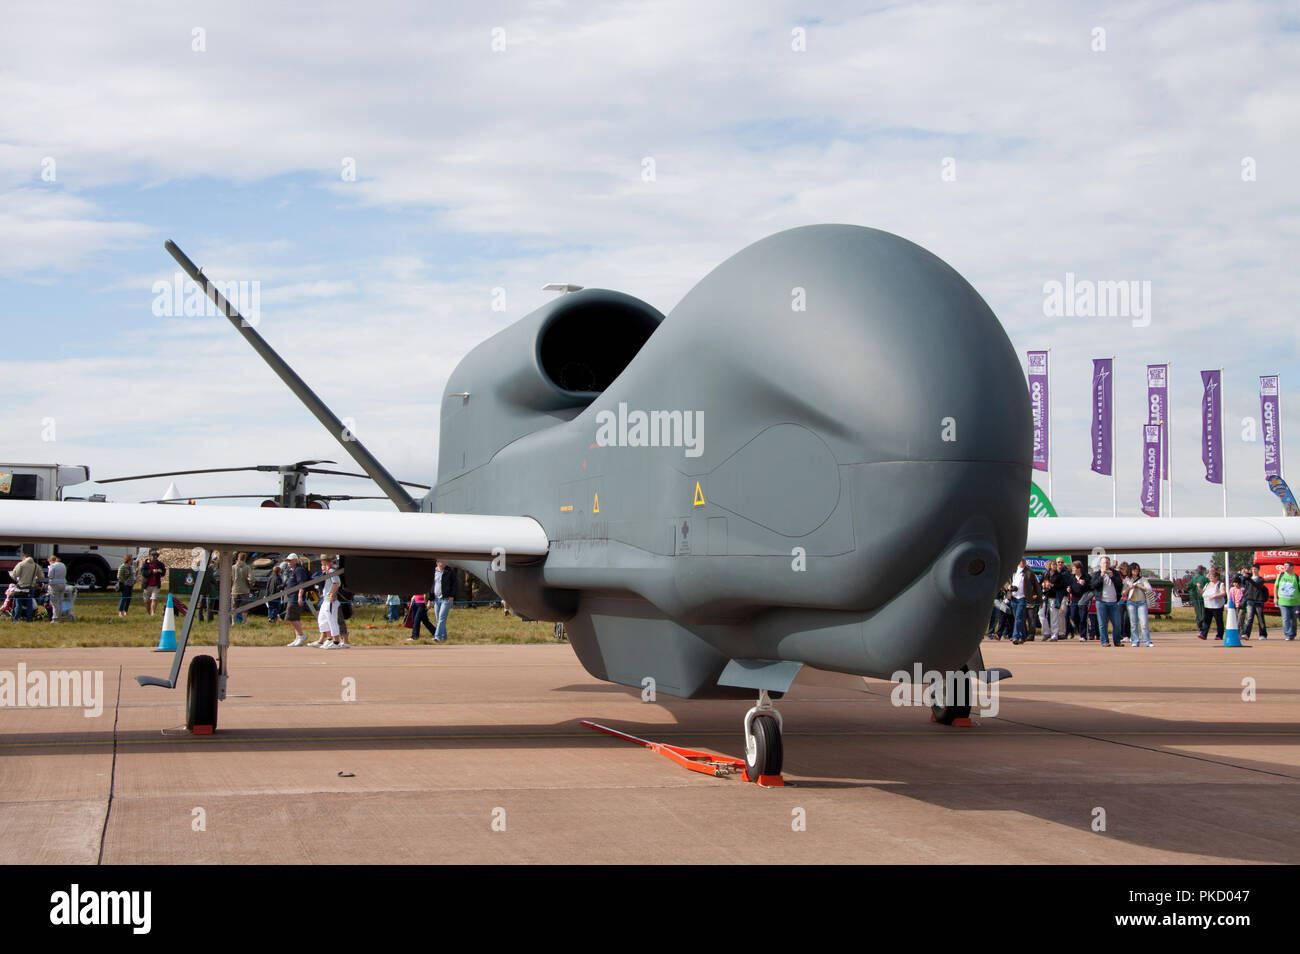 United States Air Force Northrop Grumman RQ-4B Global Hawk serial number 04-2015 which is an unmanned surveillance aircraft on display at an airshow. Stock Photo